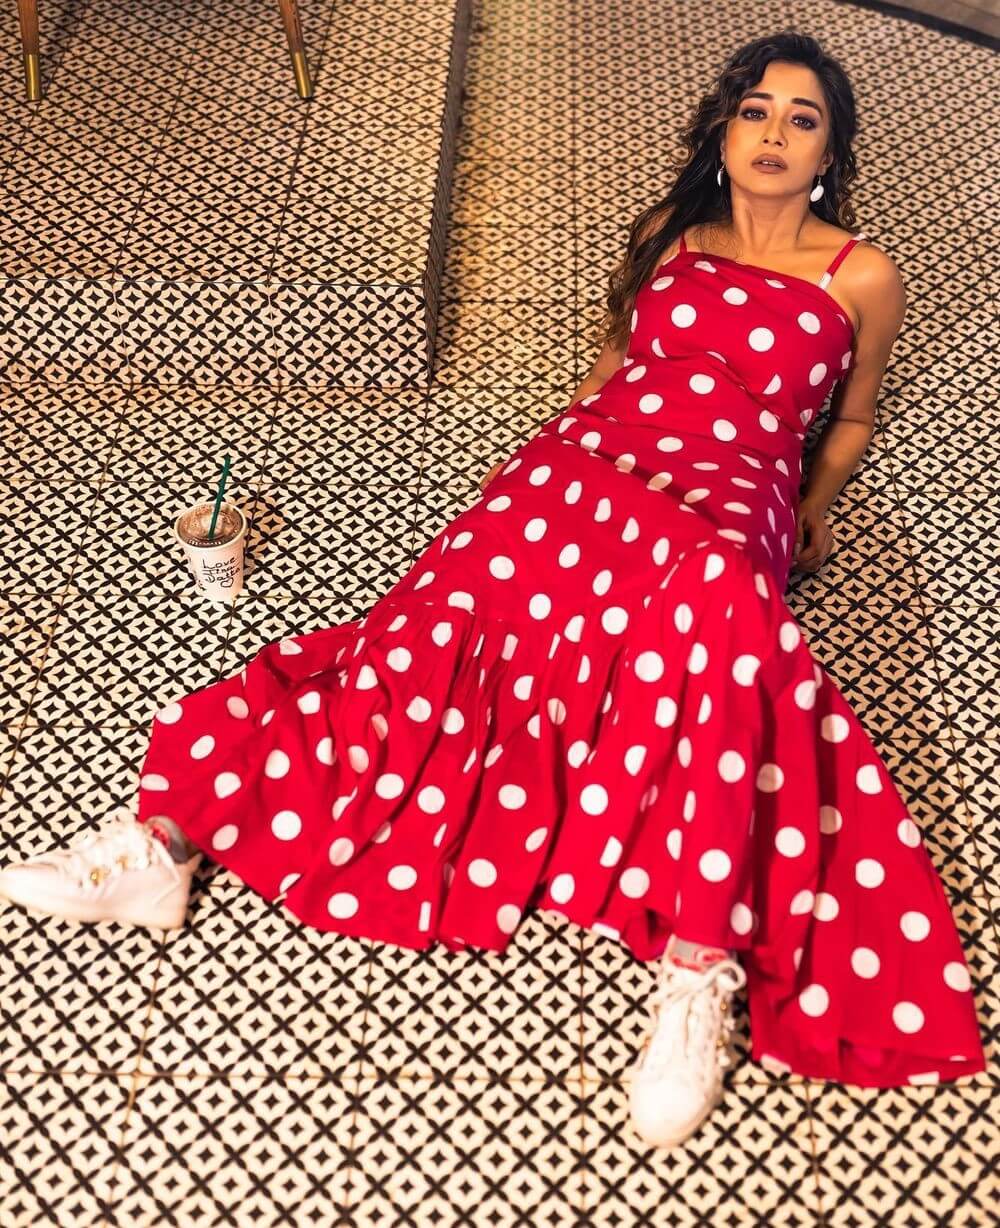 Tina Datta Rocks the Red Polka Dot Gown!